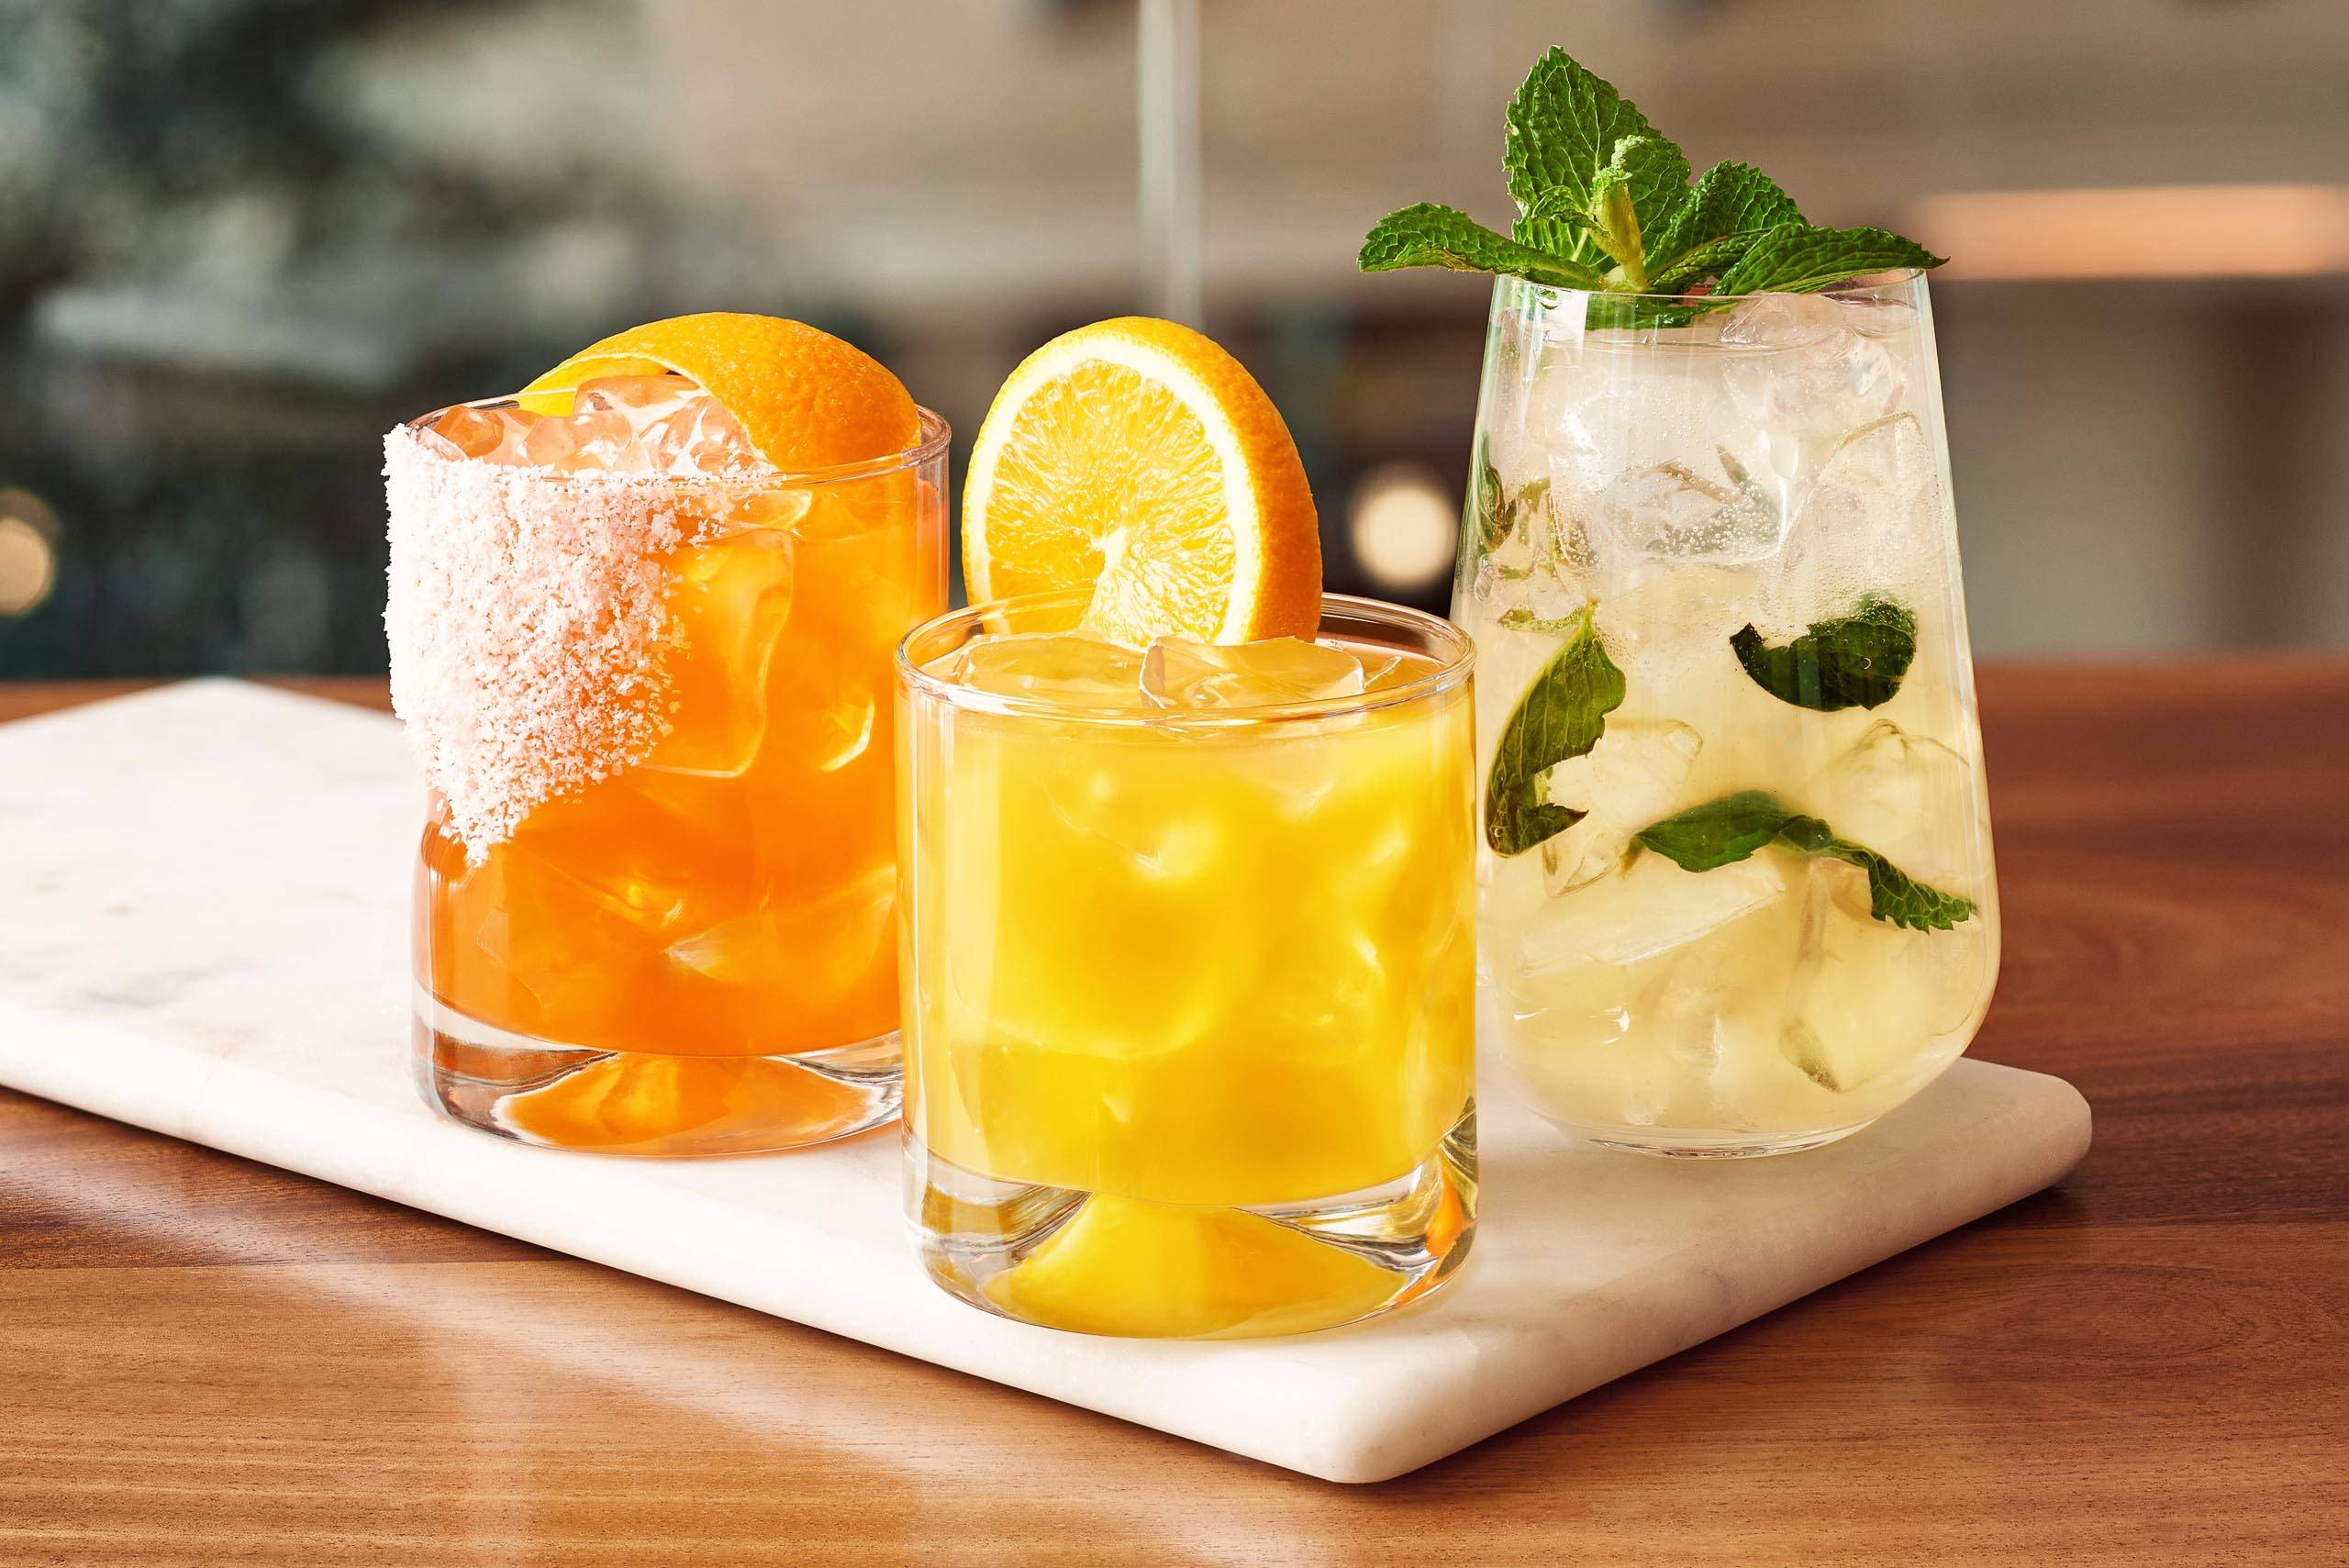 A Sip of Summer: Discover new citrus-infused cocktails at Disney Springs